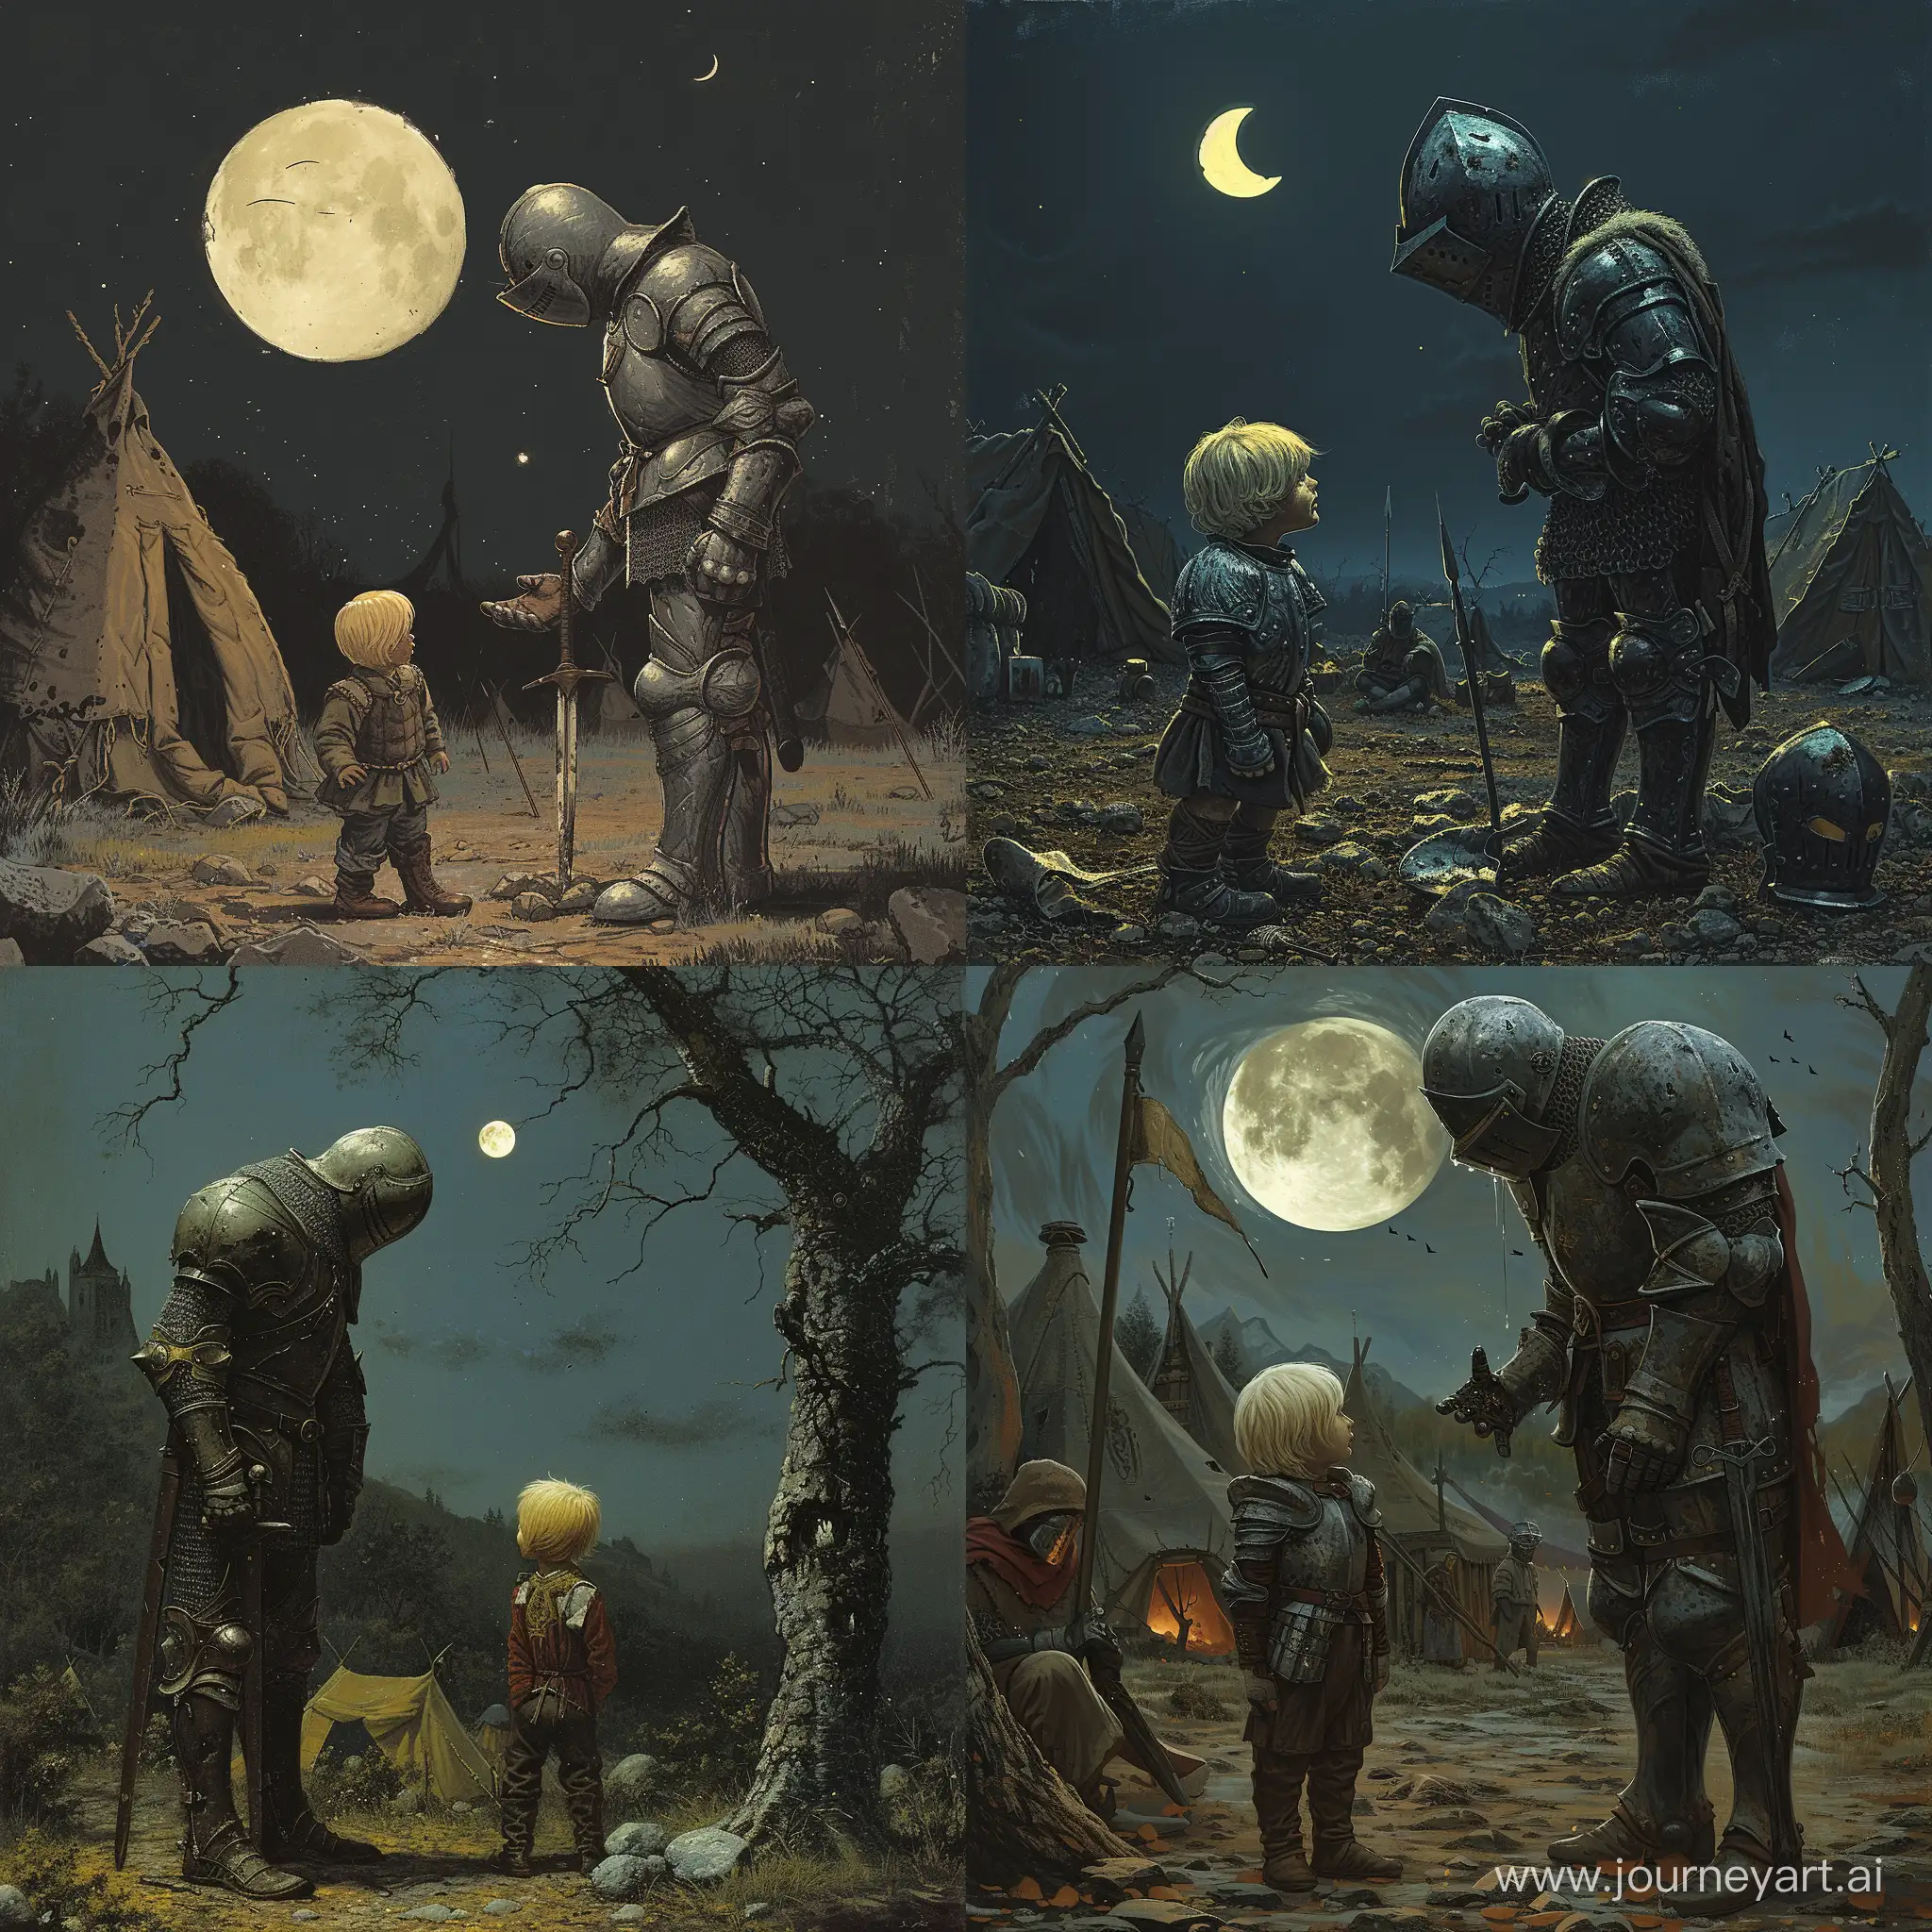 a depressed knight talking to a little boy dressed in armor, blond hair, in a camp, night time, half moon, 1970's dark fantasy style, gritty, detailed